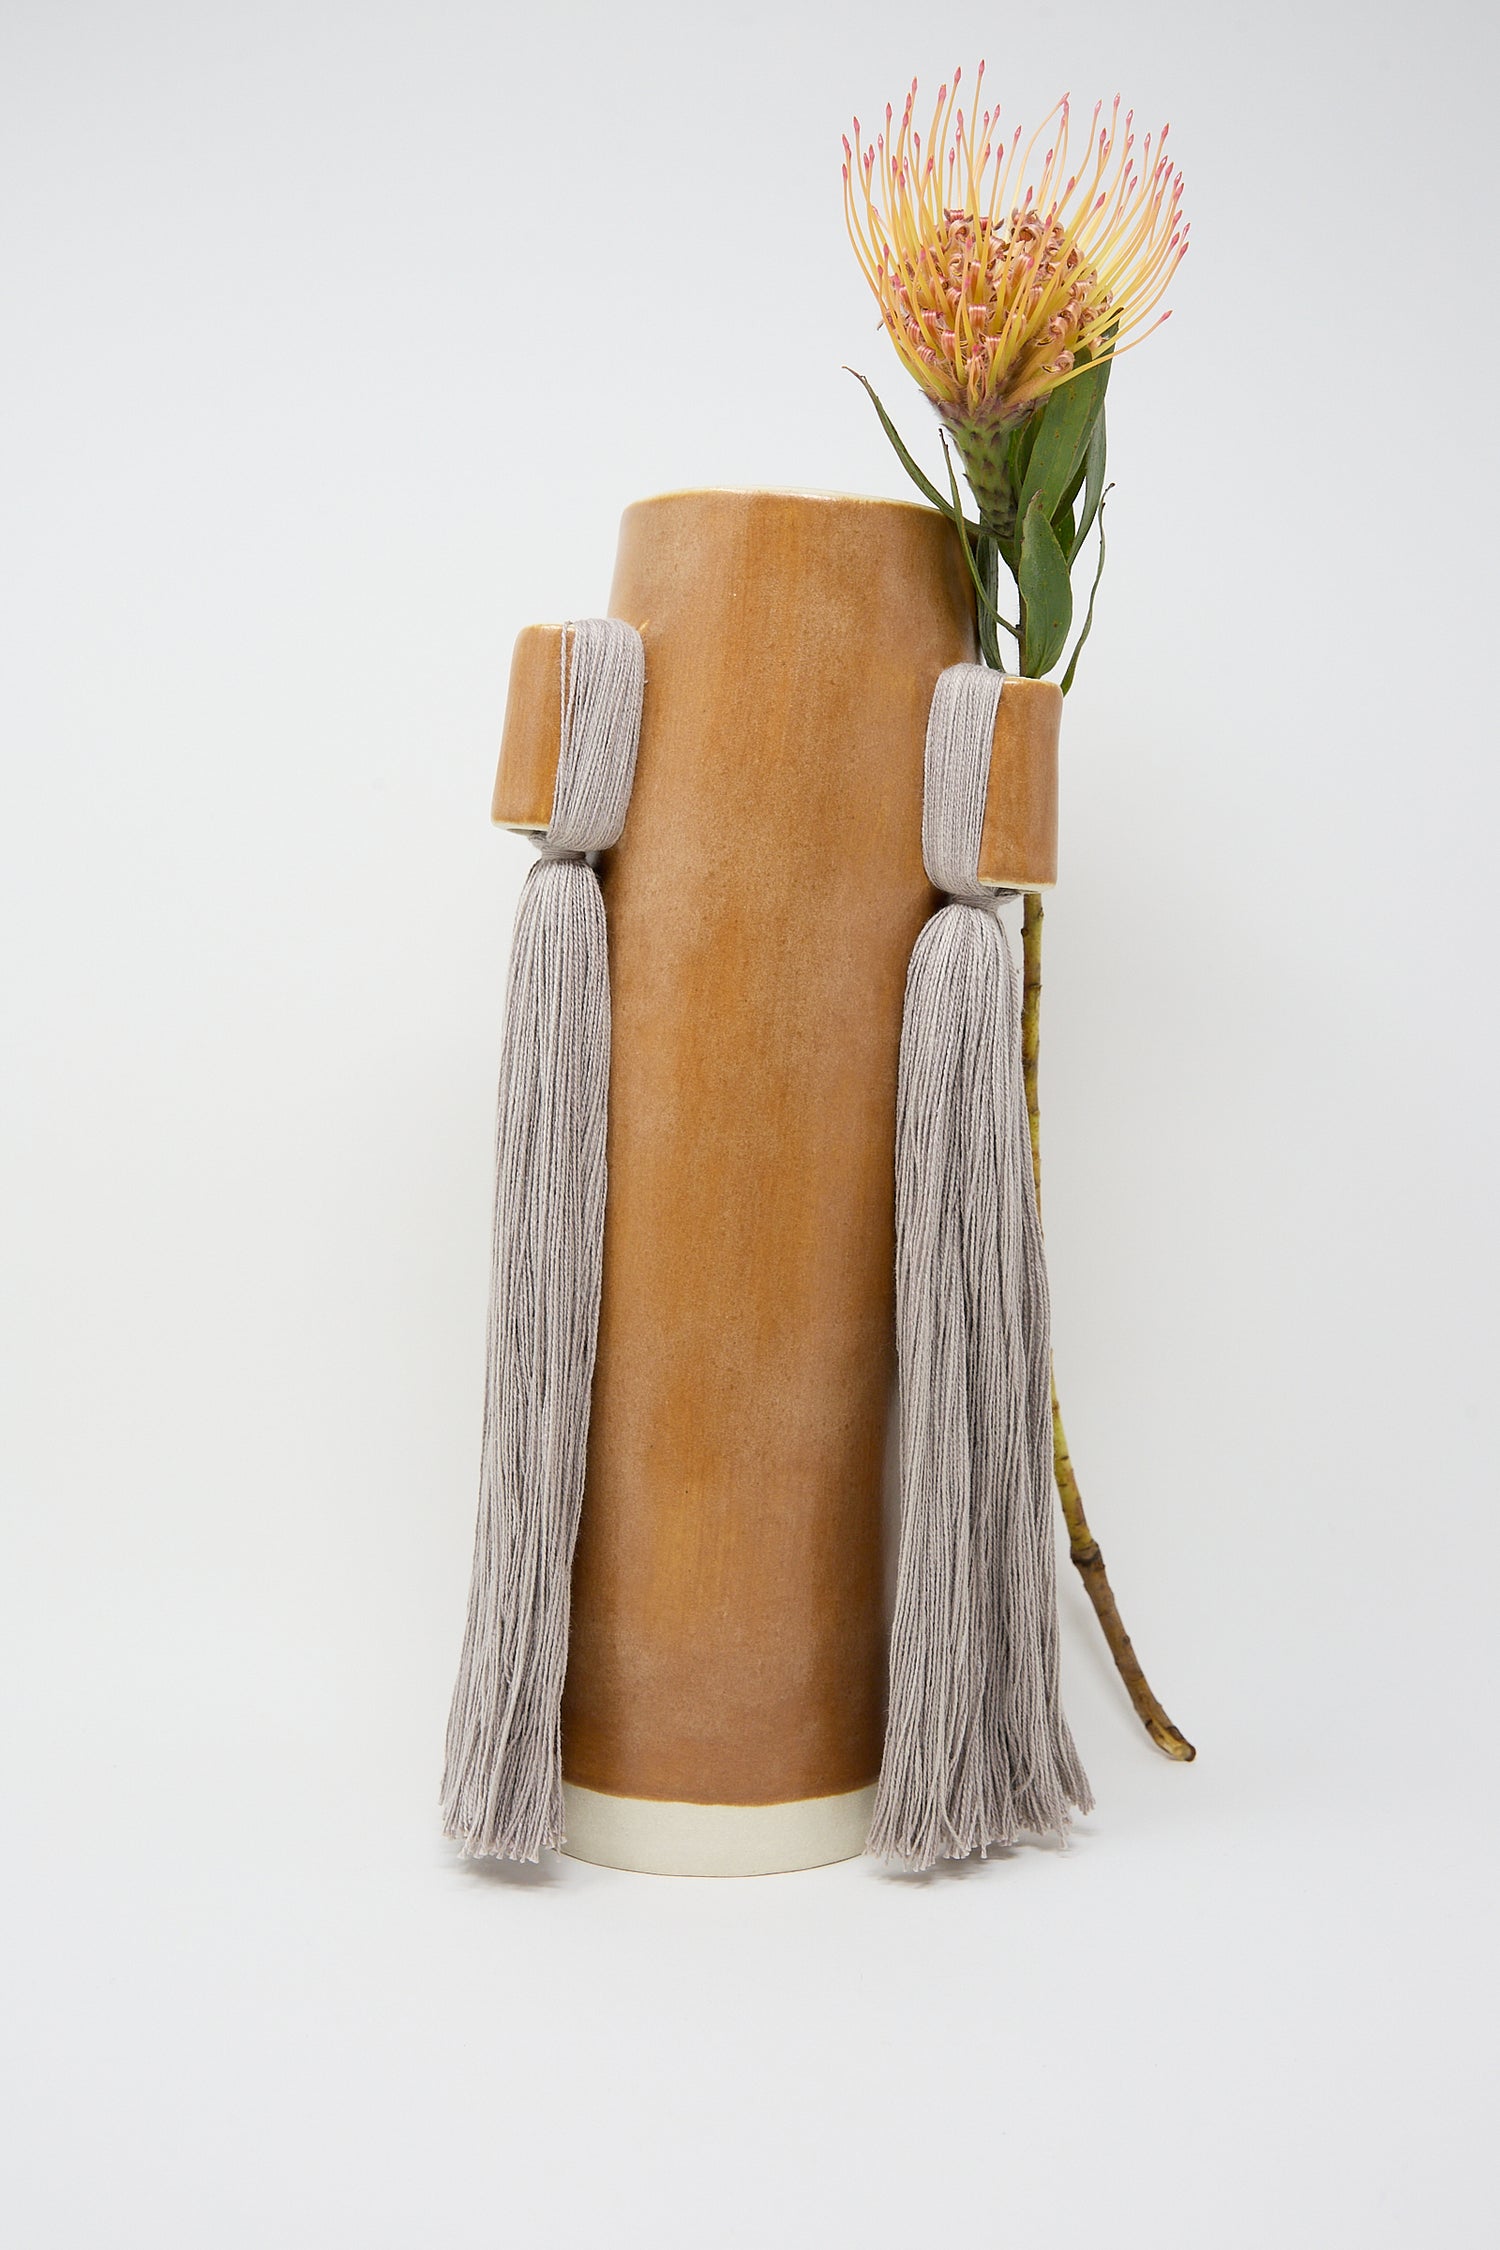 A cylindrical leather Vase #607 in Brown with tassels displaying a single protea flower is handcrafted by Karen Tinney.